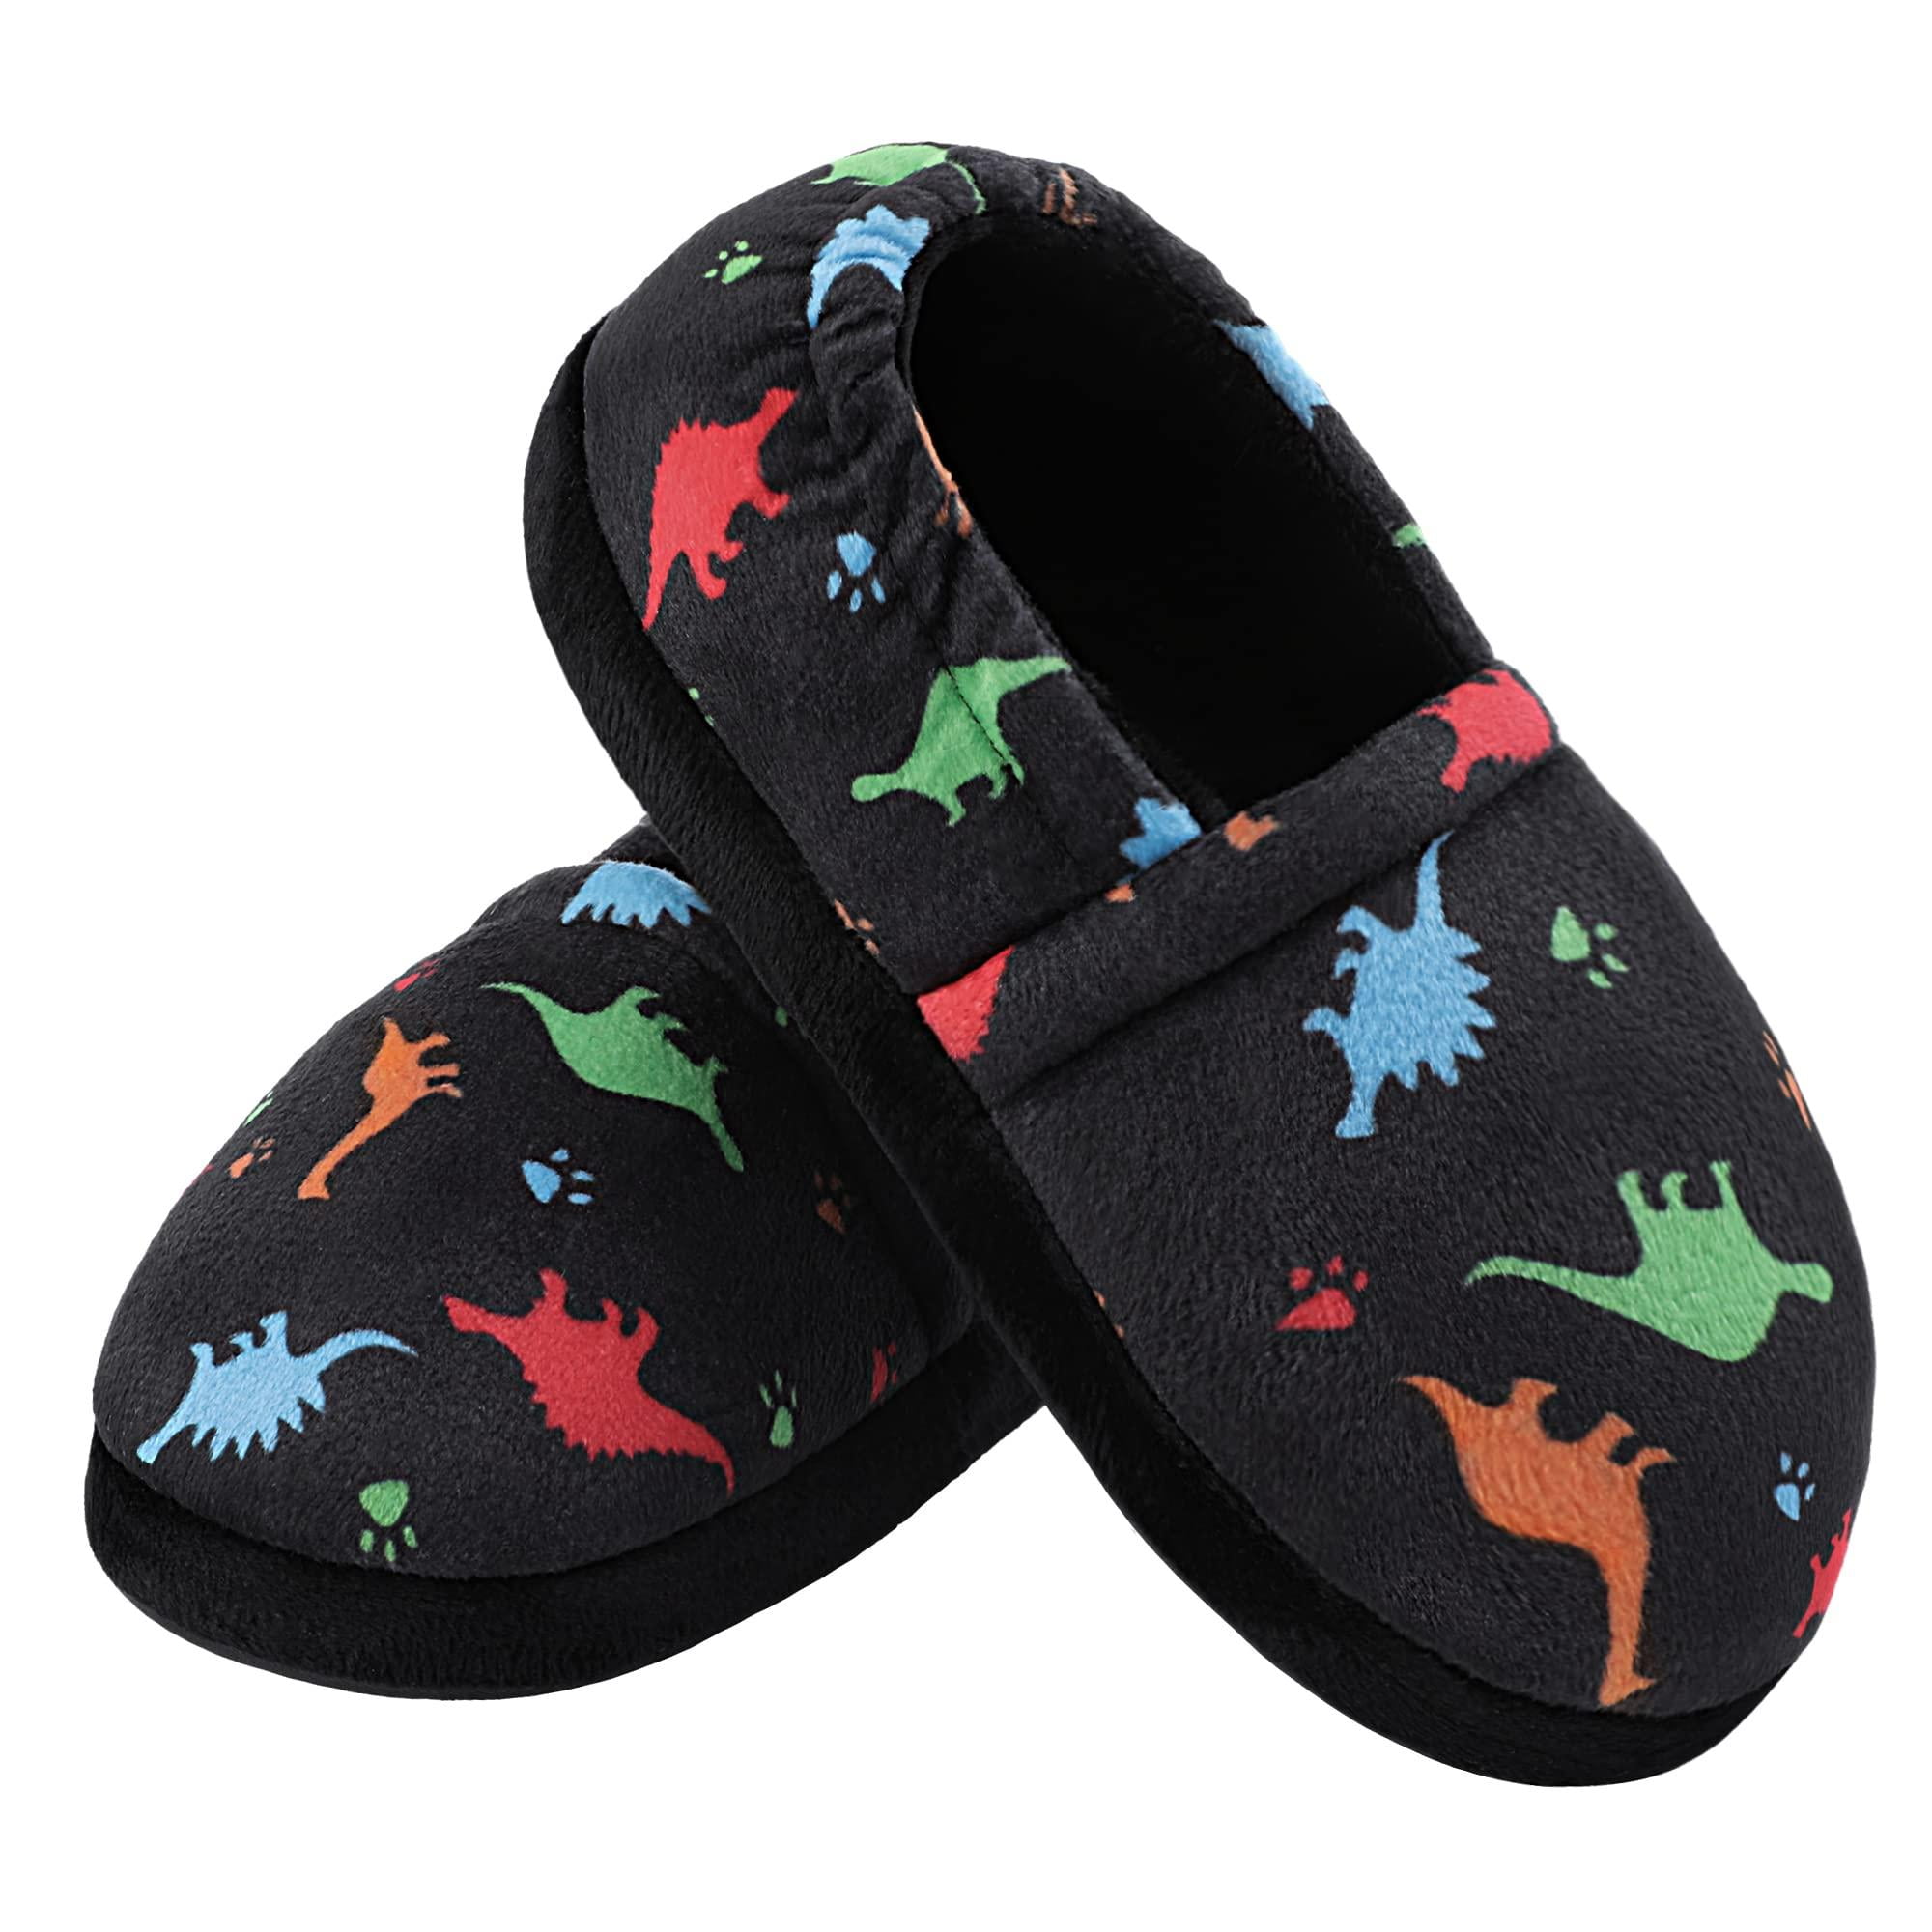 HOMEHOT Kids Slippers Boys Anti Skid Rubber Sole Indoor Outdoor Shoes ...